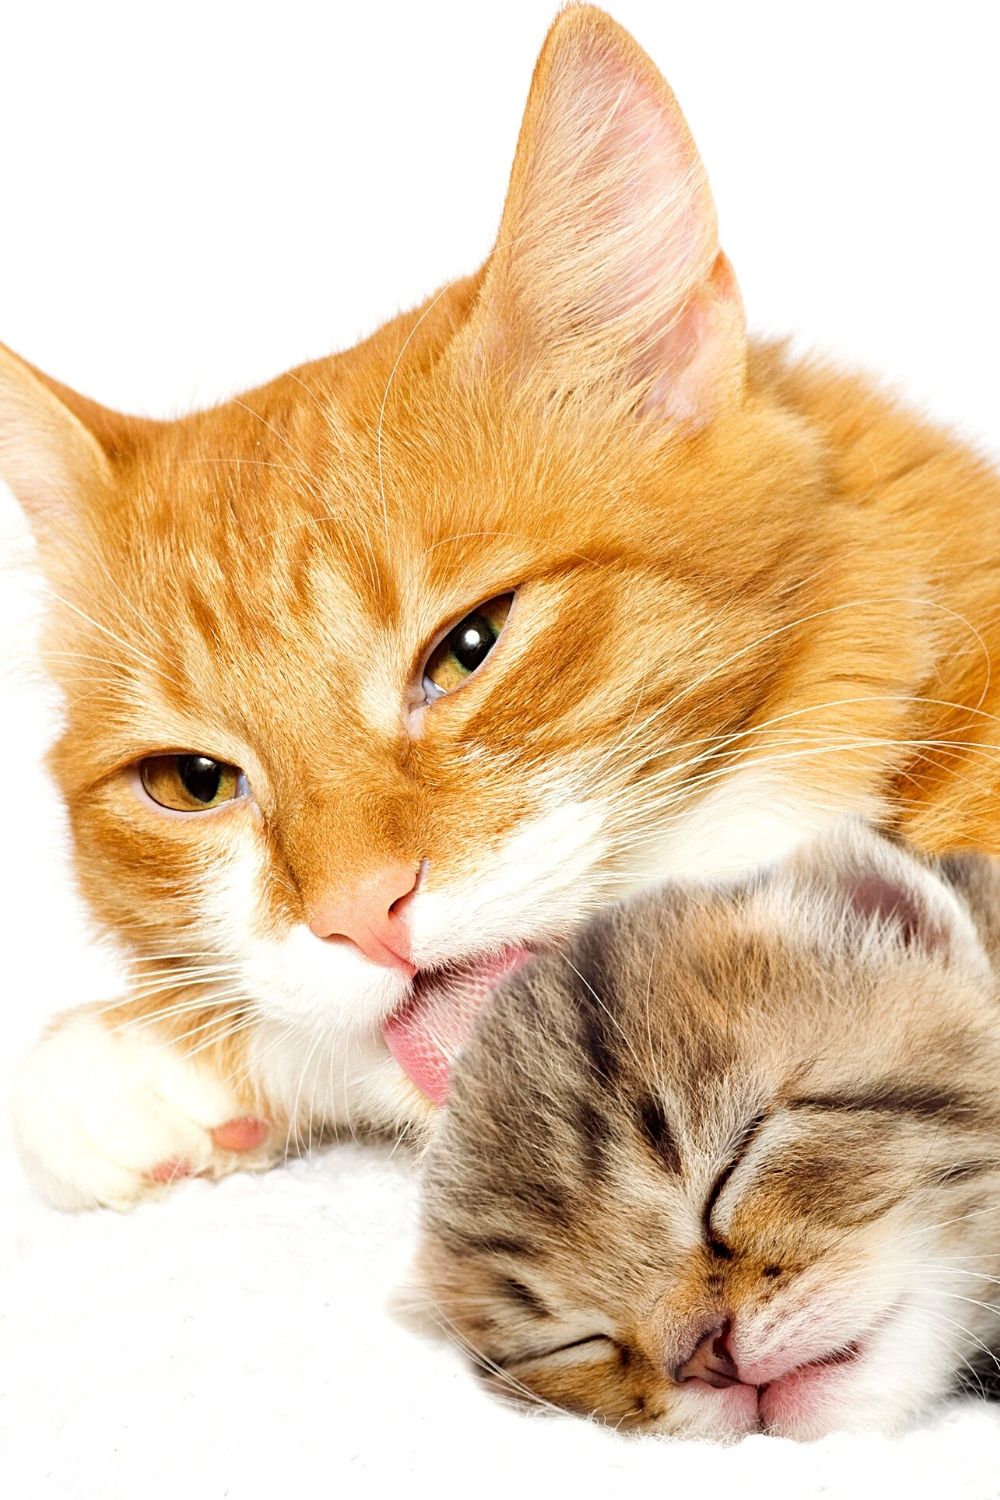 Mother cats lick their kittens to clean and bond with them